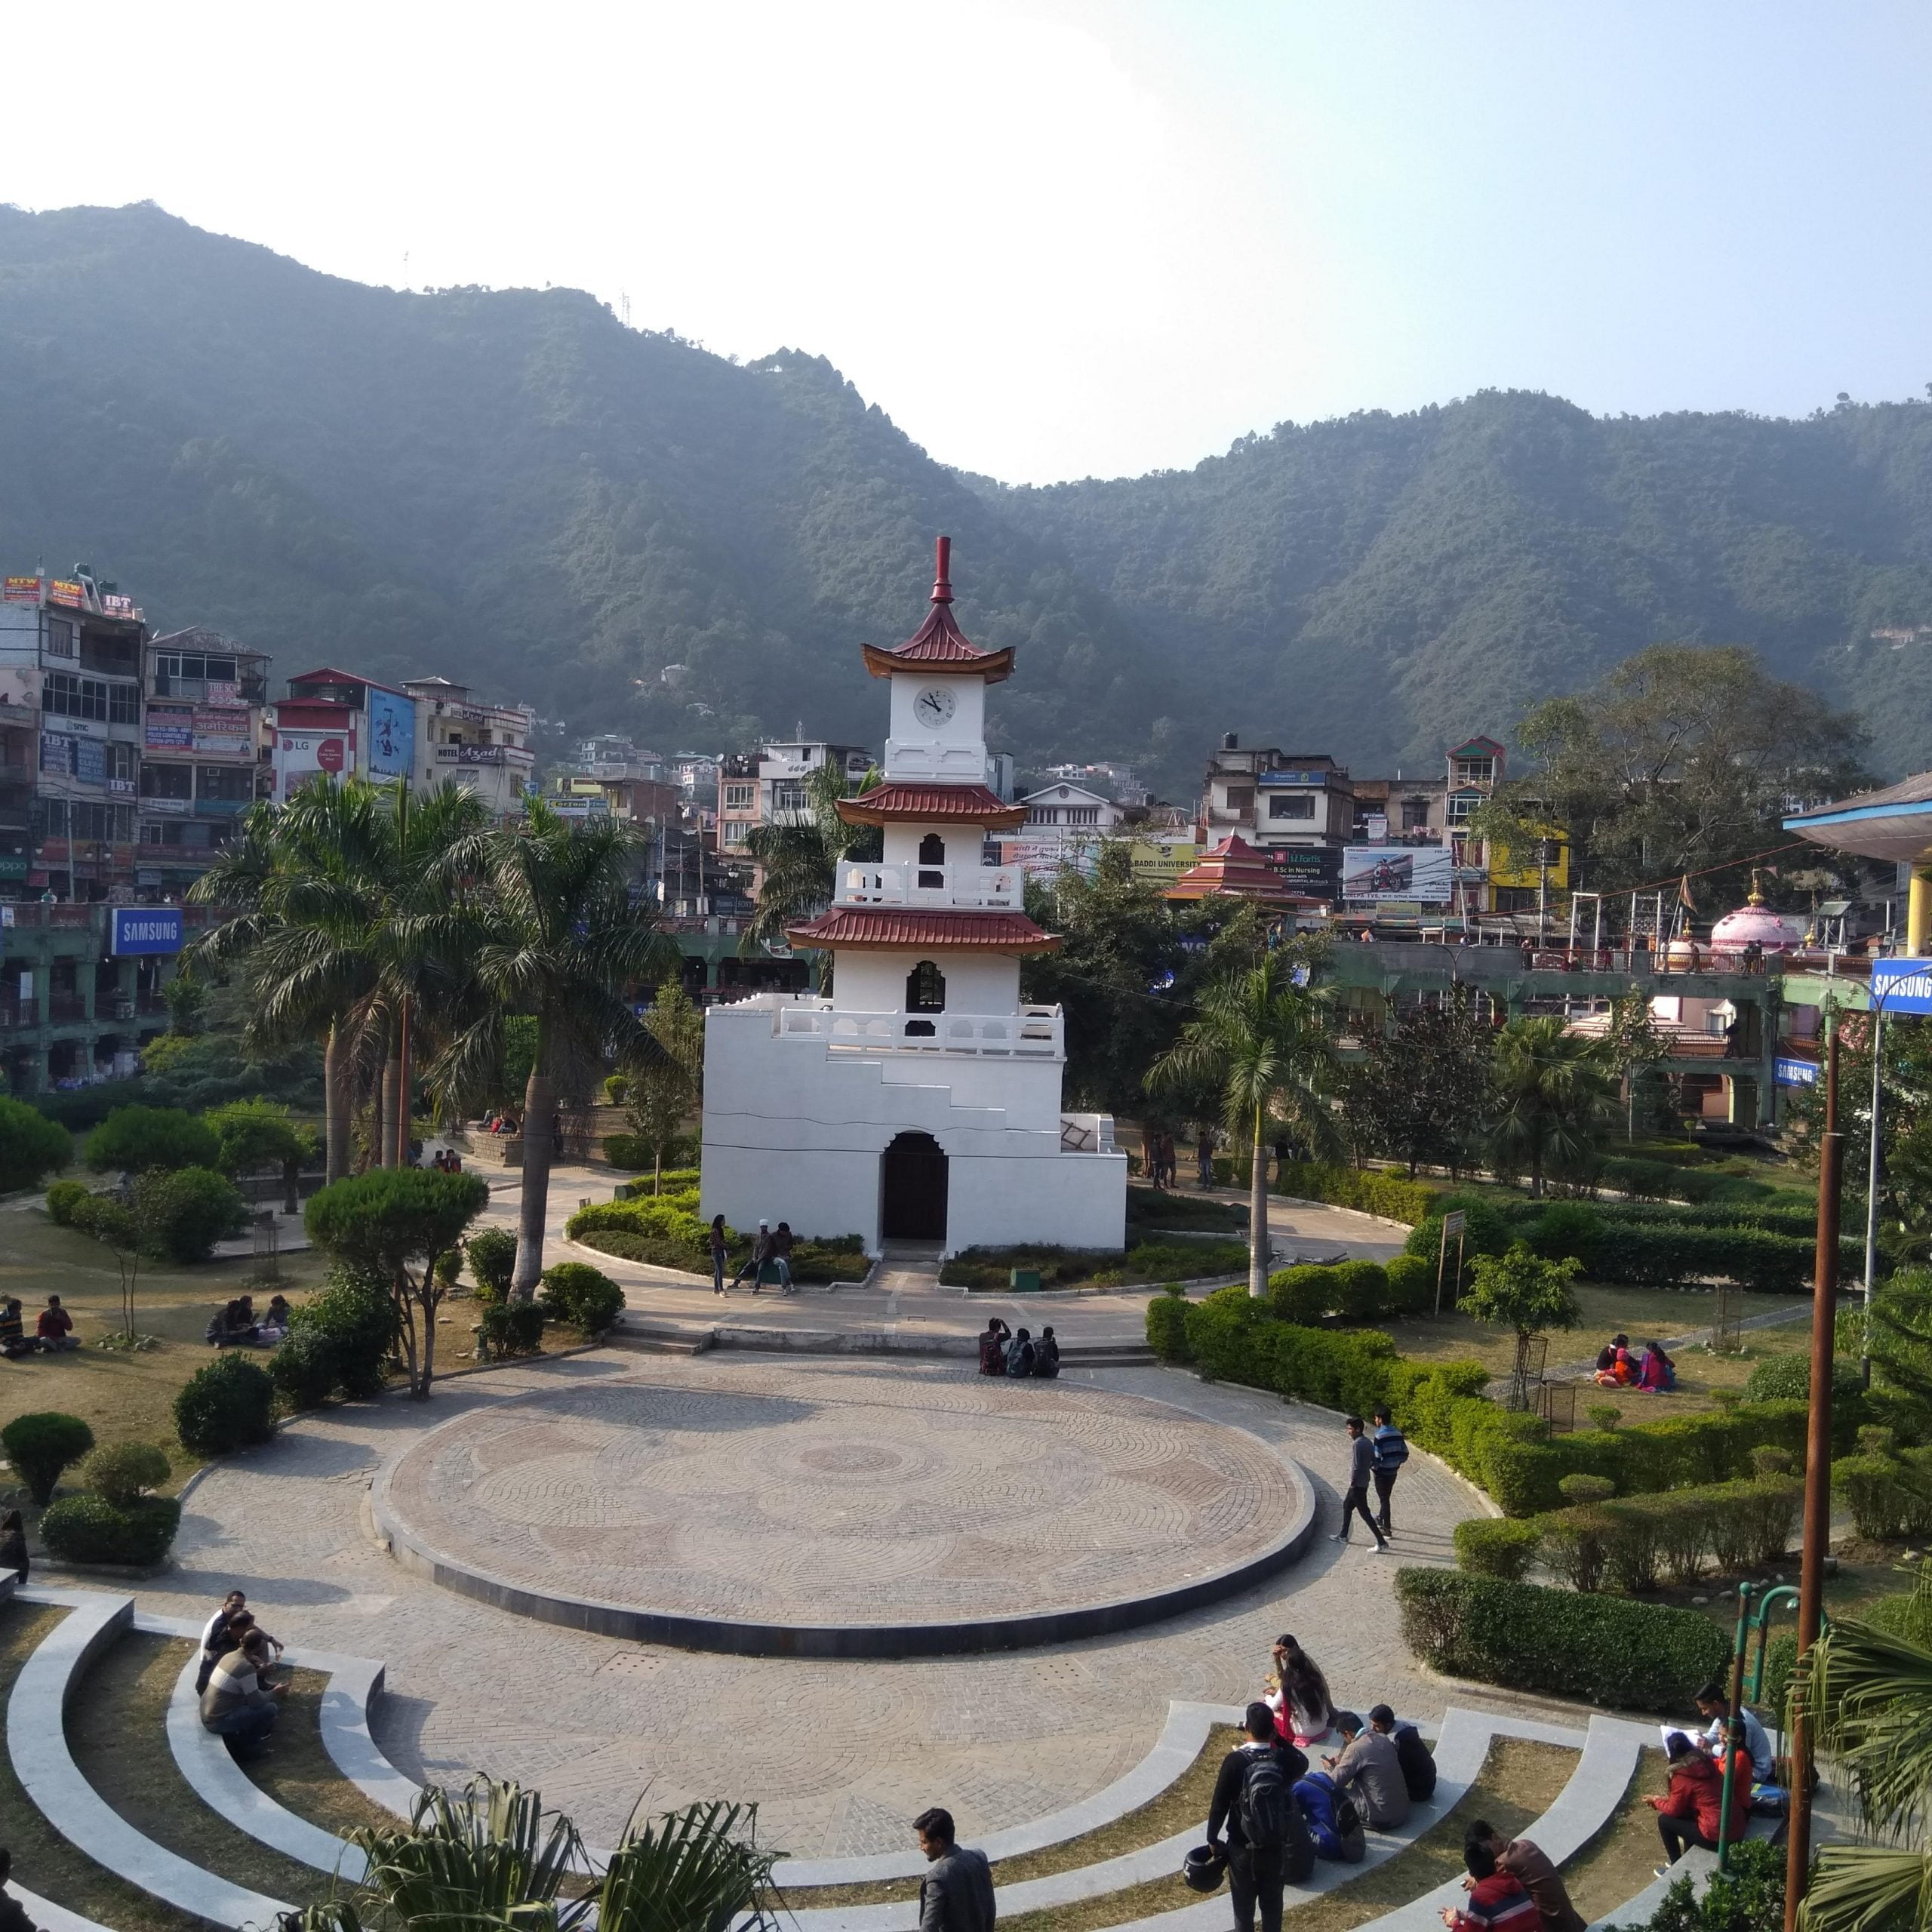 The first post I ever made on reddit, close to my roots (Clock Tower, Mandi)